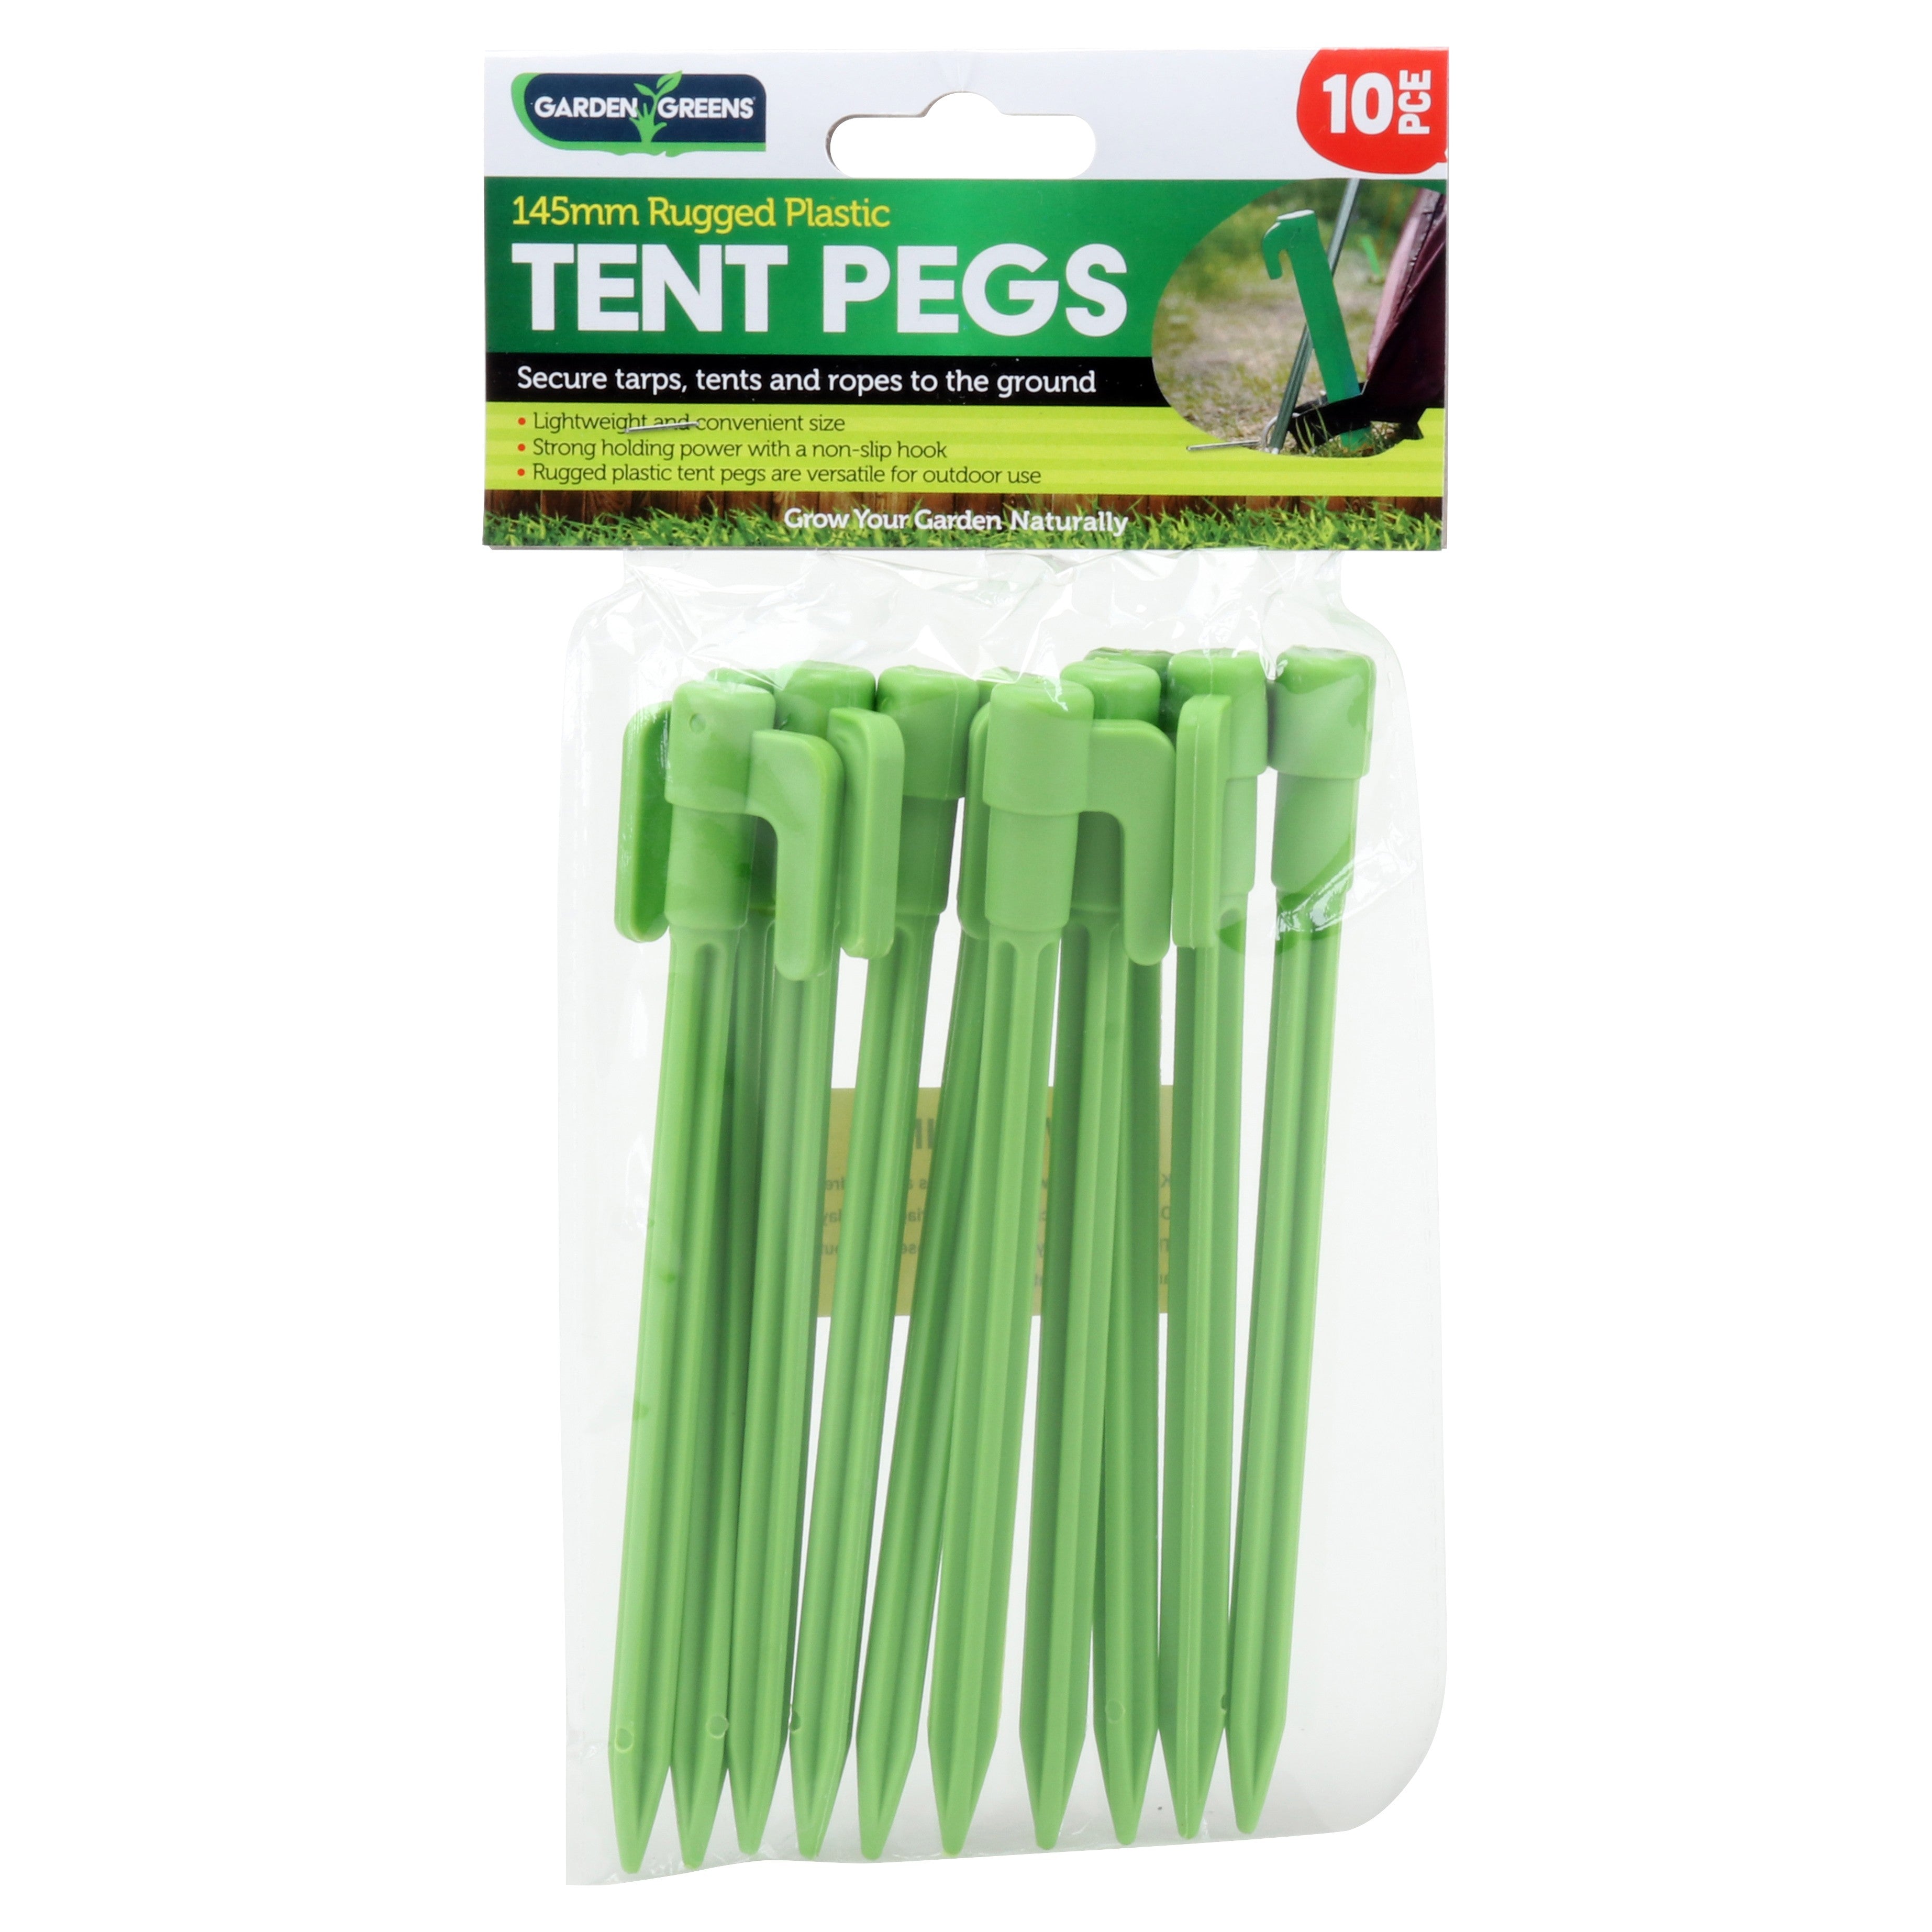 Rugged Plastic Tent Pegs - 145mm 10 Piece Pack - Dollars and Sense